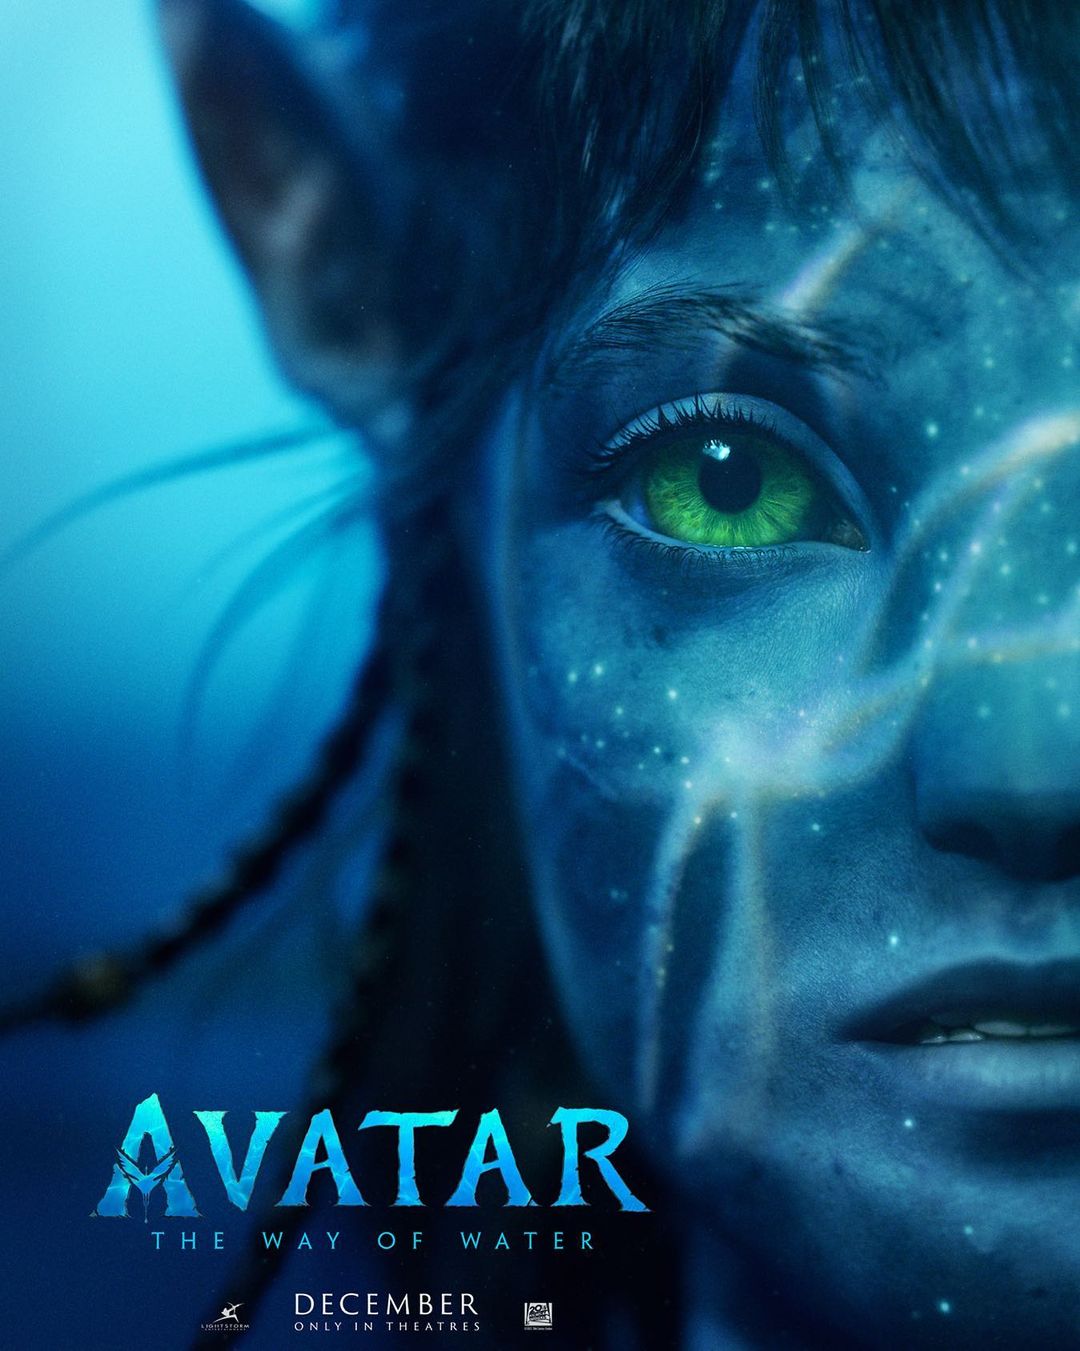 Avatar The Way of Water review